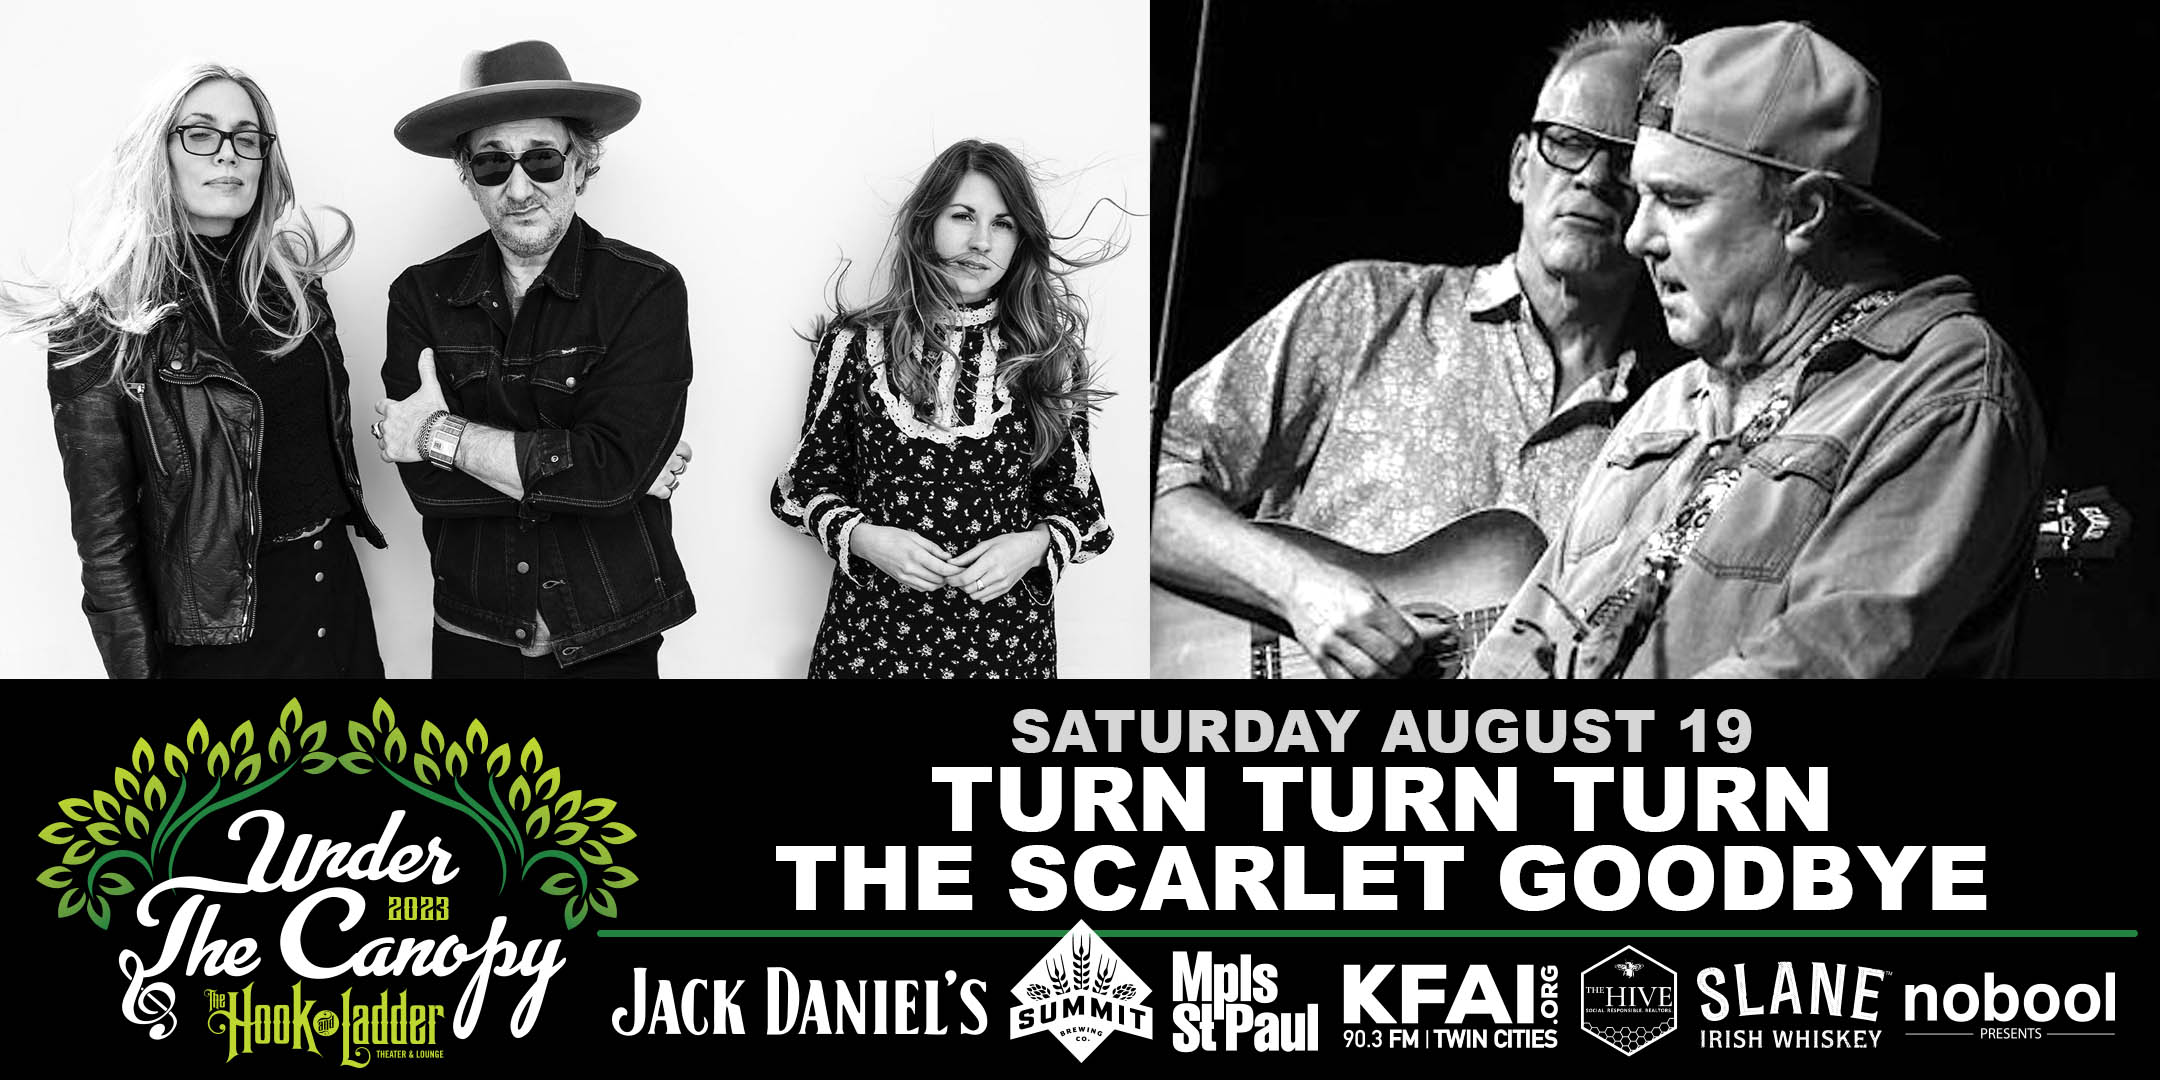 Turn, Turn, Turn plus The Scarlett Goodbye Saturday, August 19, 2023 Under The Canopy at The Hook and Ladder Theater "An Urban Outdoor Summer Concert Series" Doors 6:00pm :: Music 7:00pm :: 21+ Reserved Seats: $40 GA: $24 ADV / $30 DOS